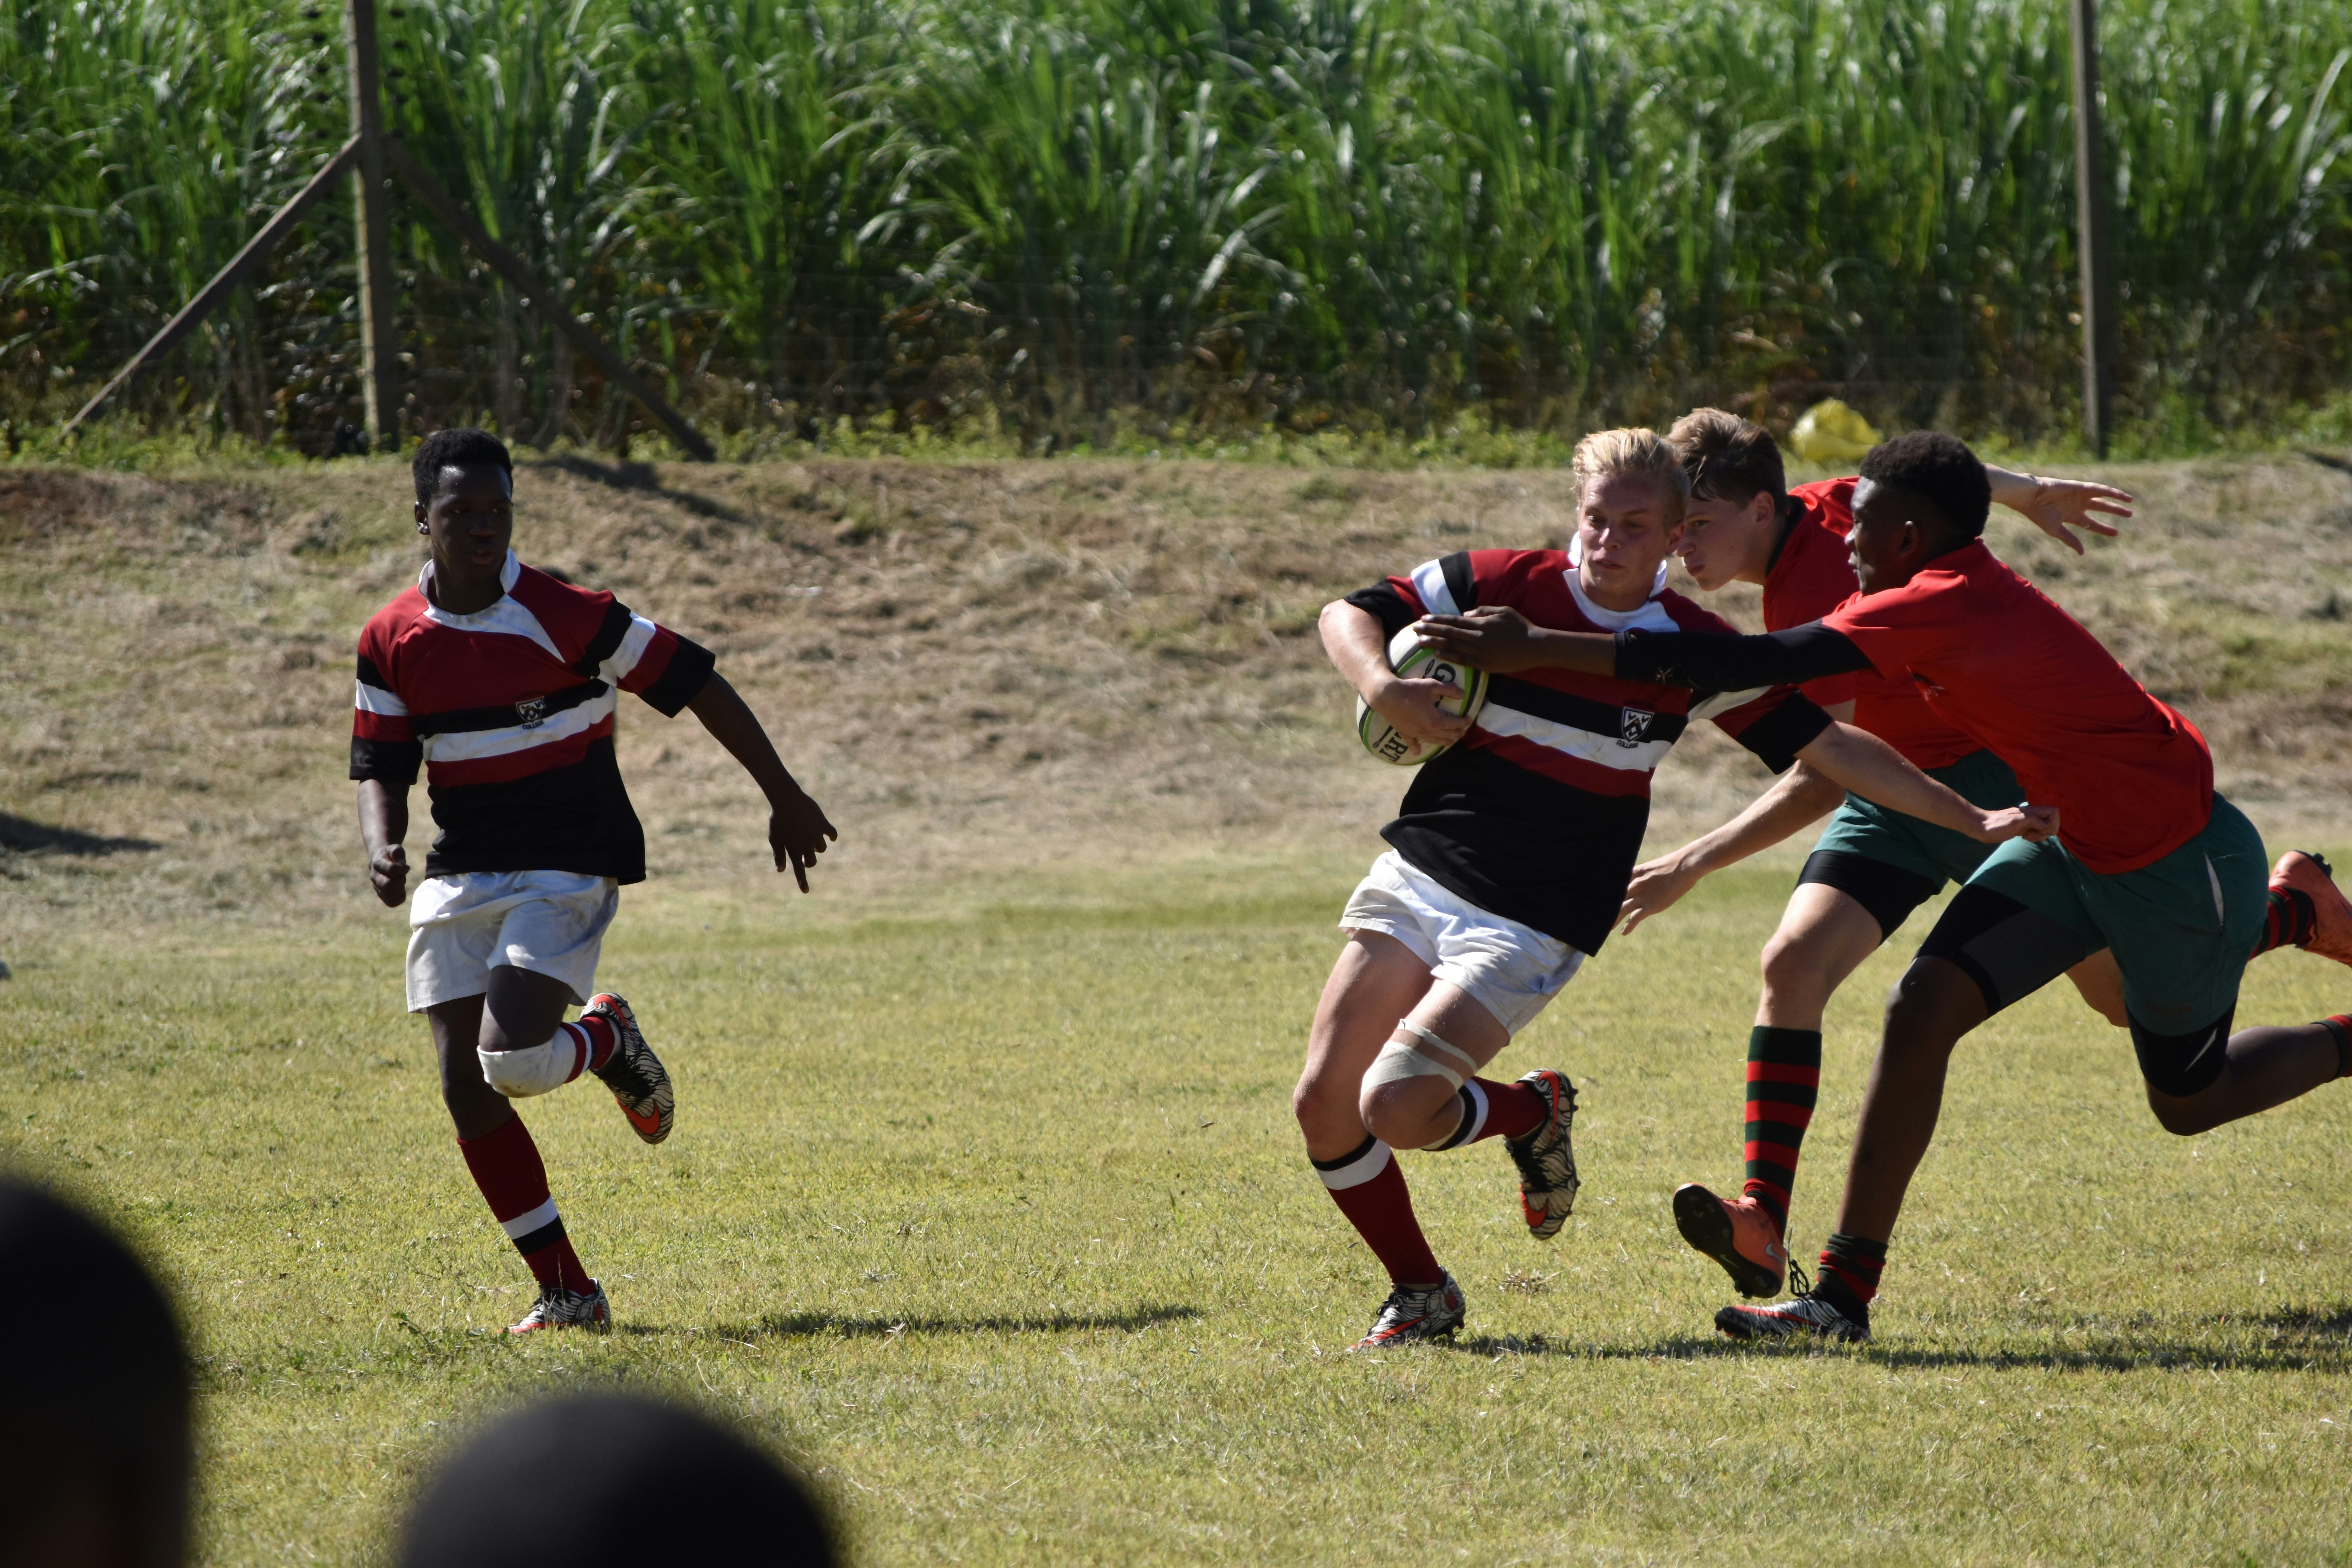 School children playing a rugby match in front of sugar cane on a summers day in Durban South Africa